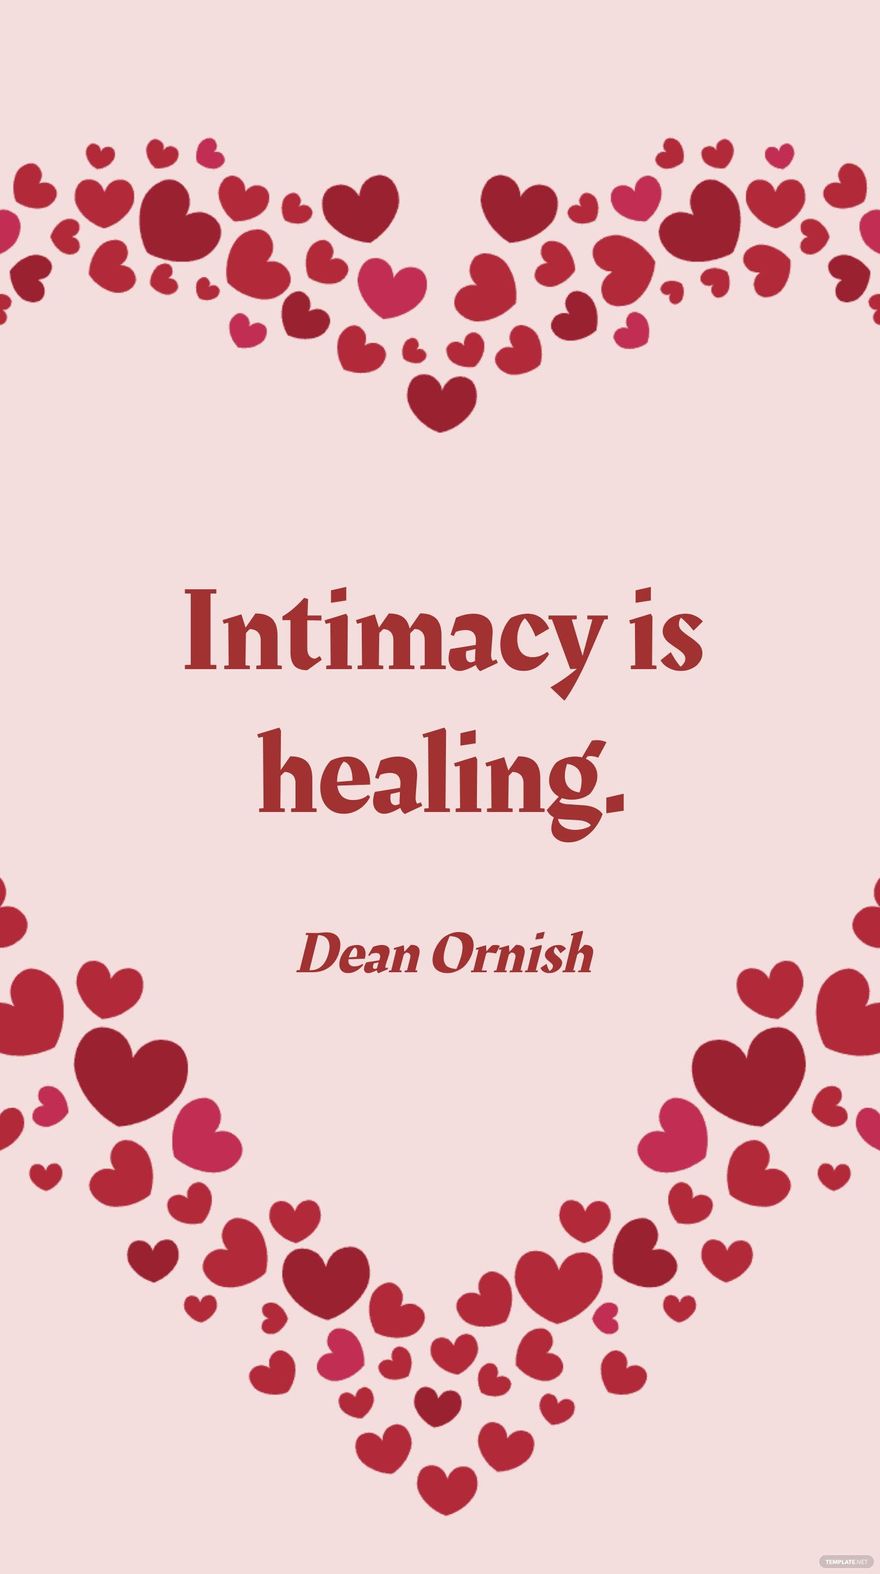 Free Dean Ornish - Intimacy is healing.